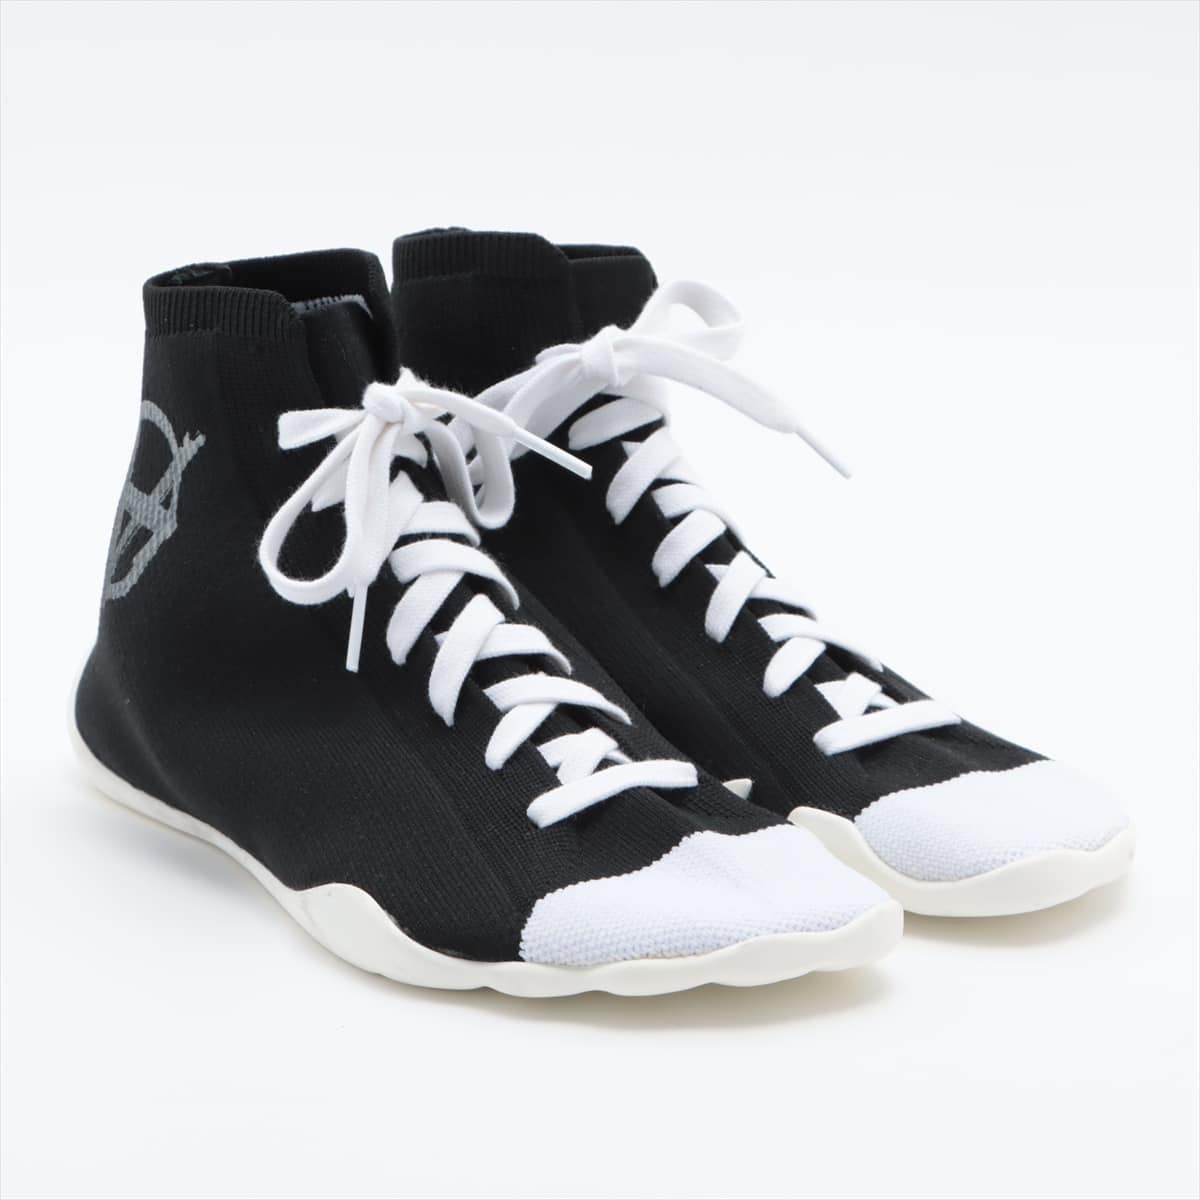 Vetements 19AW Fabric Sneakers 43 Men's Black × White Socks anarchy